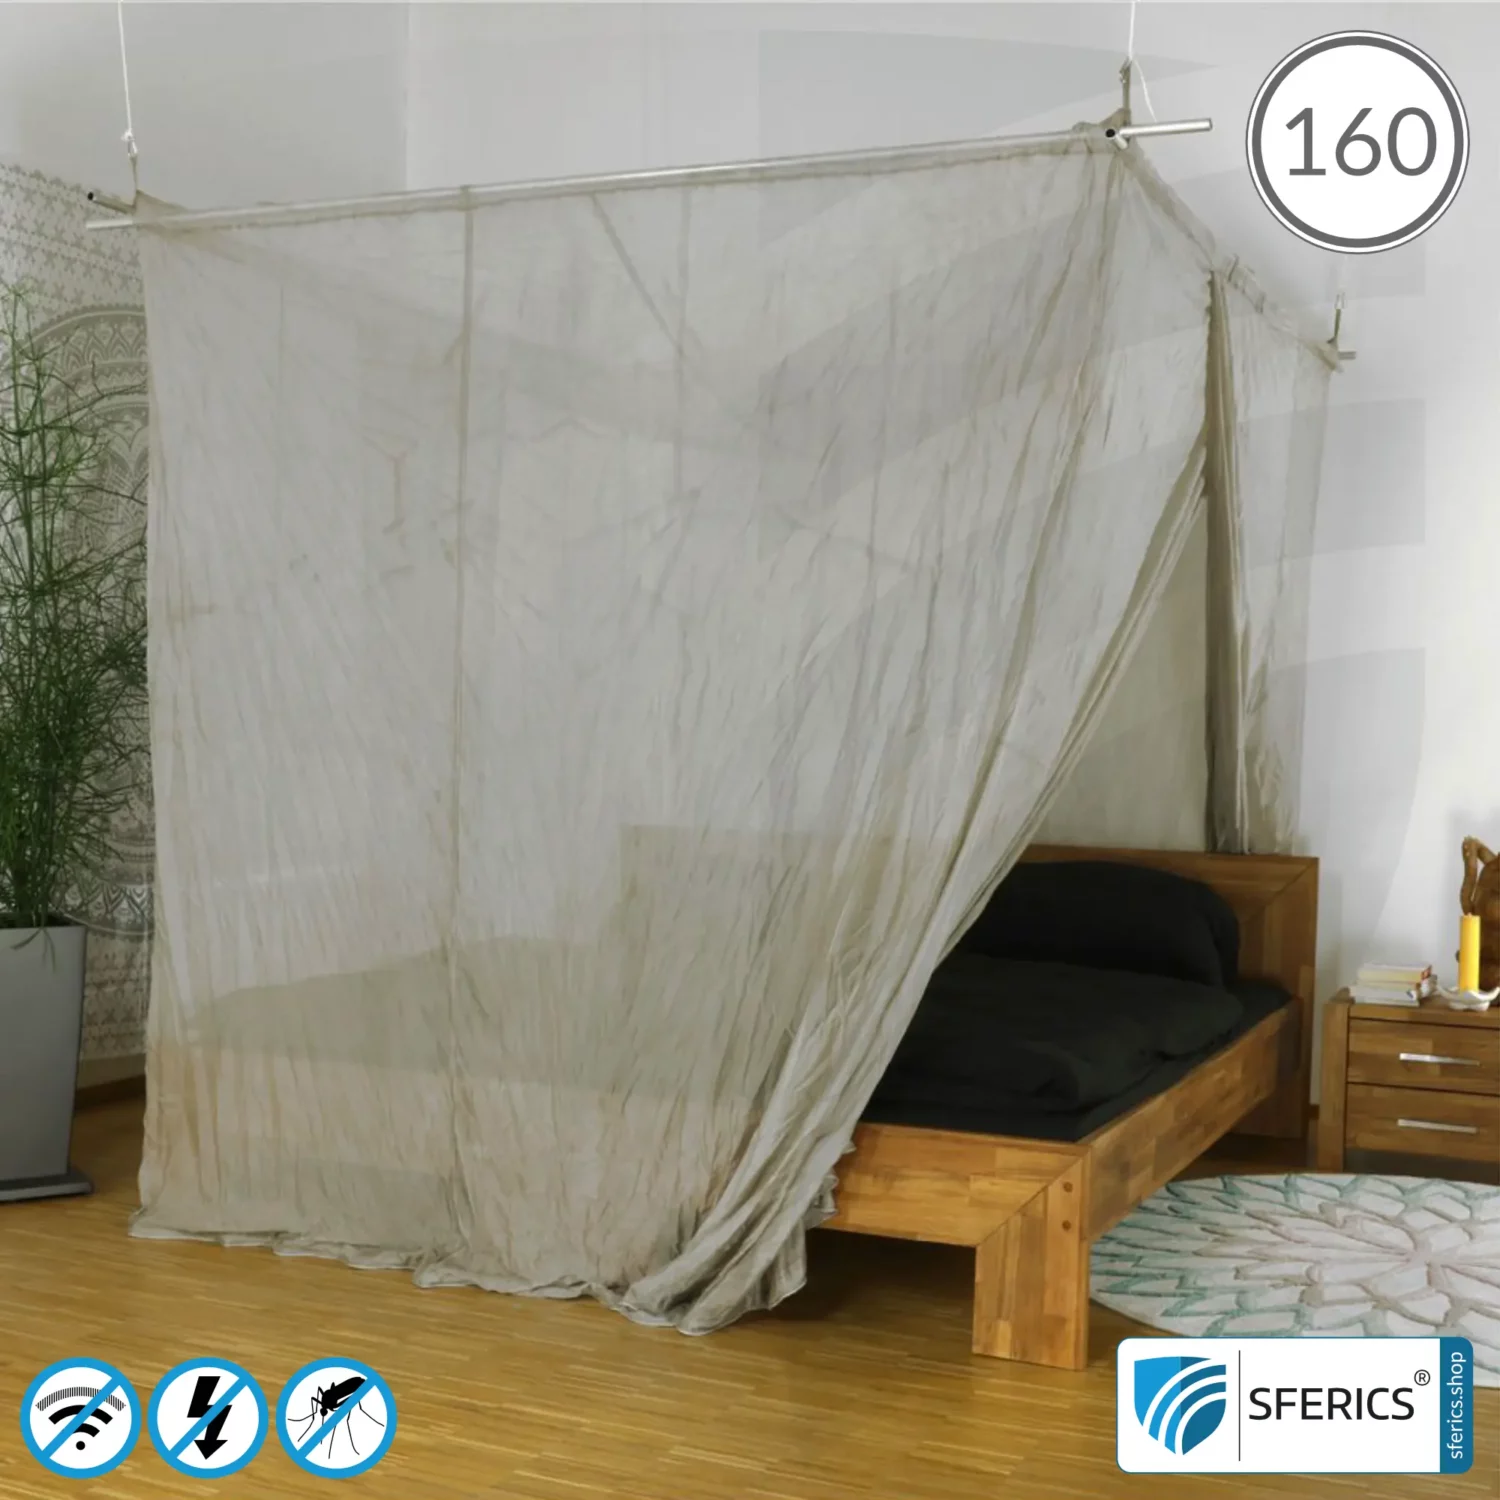 Shielding canopy Electrosmog PRO | QUEEN SIZE BED, 160 CM | Shielding RF radiation over 99.99% (48 dB). Groundable. Effective against 5G!